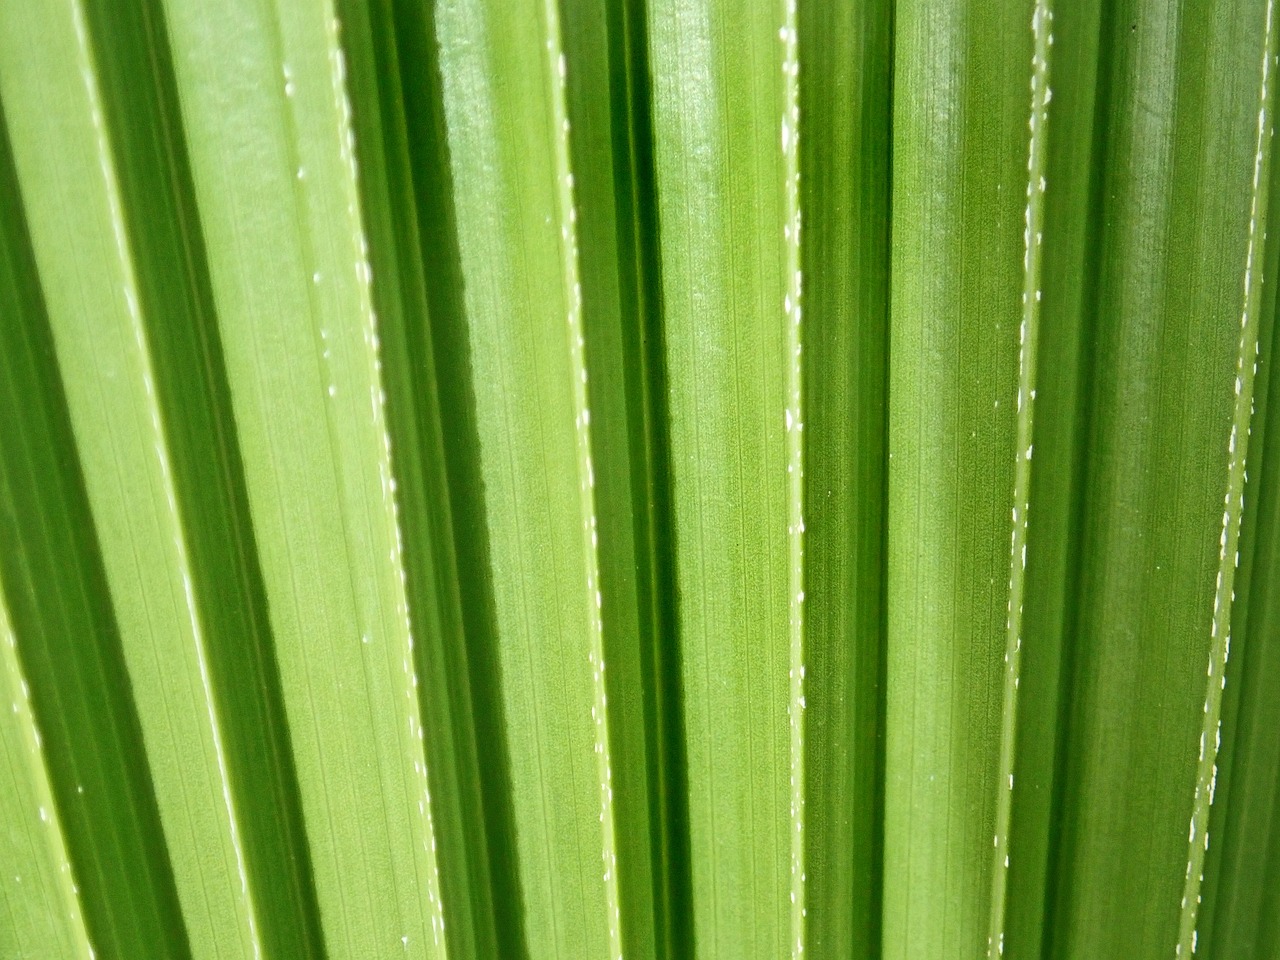 a close up of a leaf of a plant, hurufiyya, blessing palms, jelly - like texture, coated pleats, close up of lain iwakura